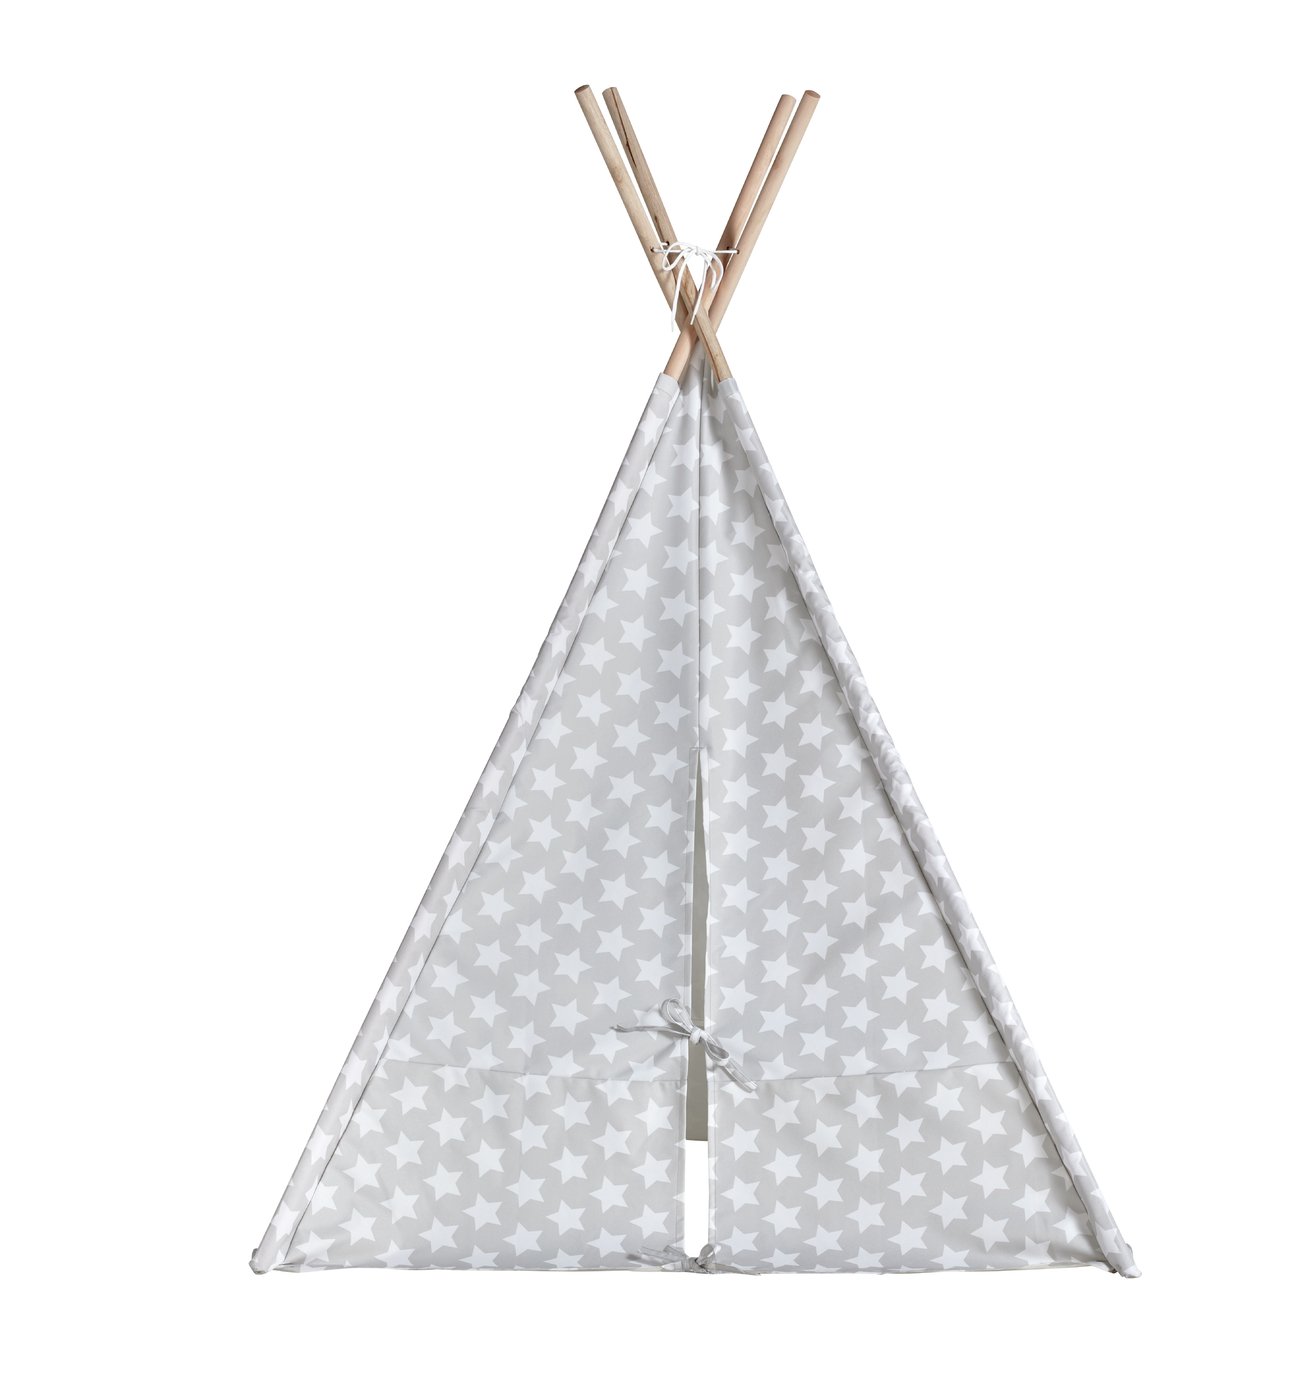 Kaikoo Kids Play Silver Teepee Tent Review